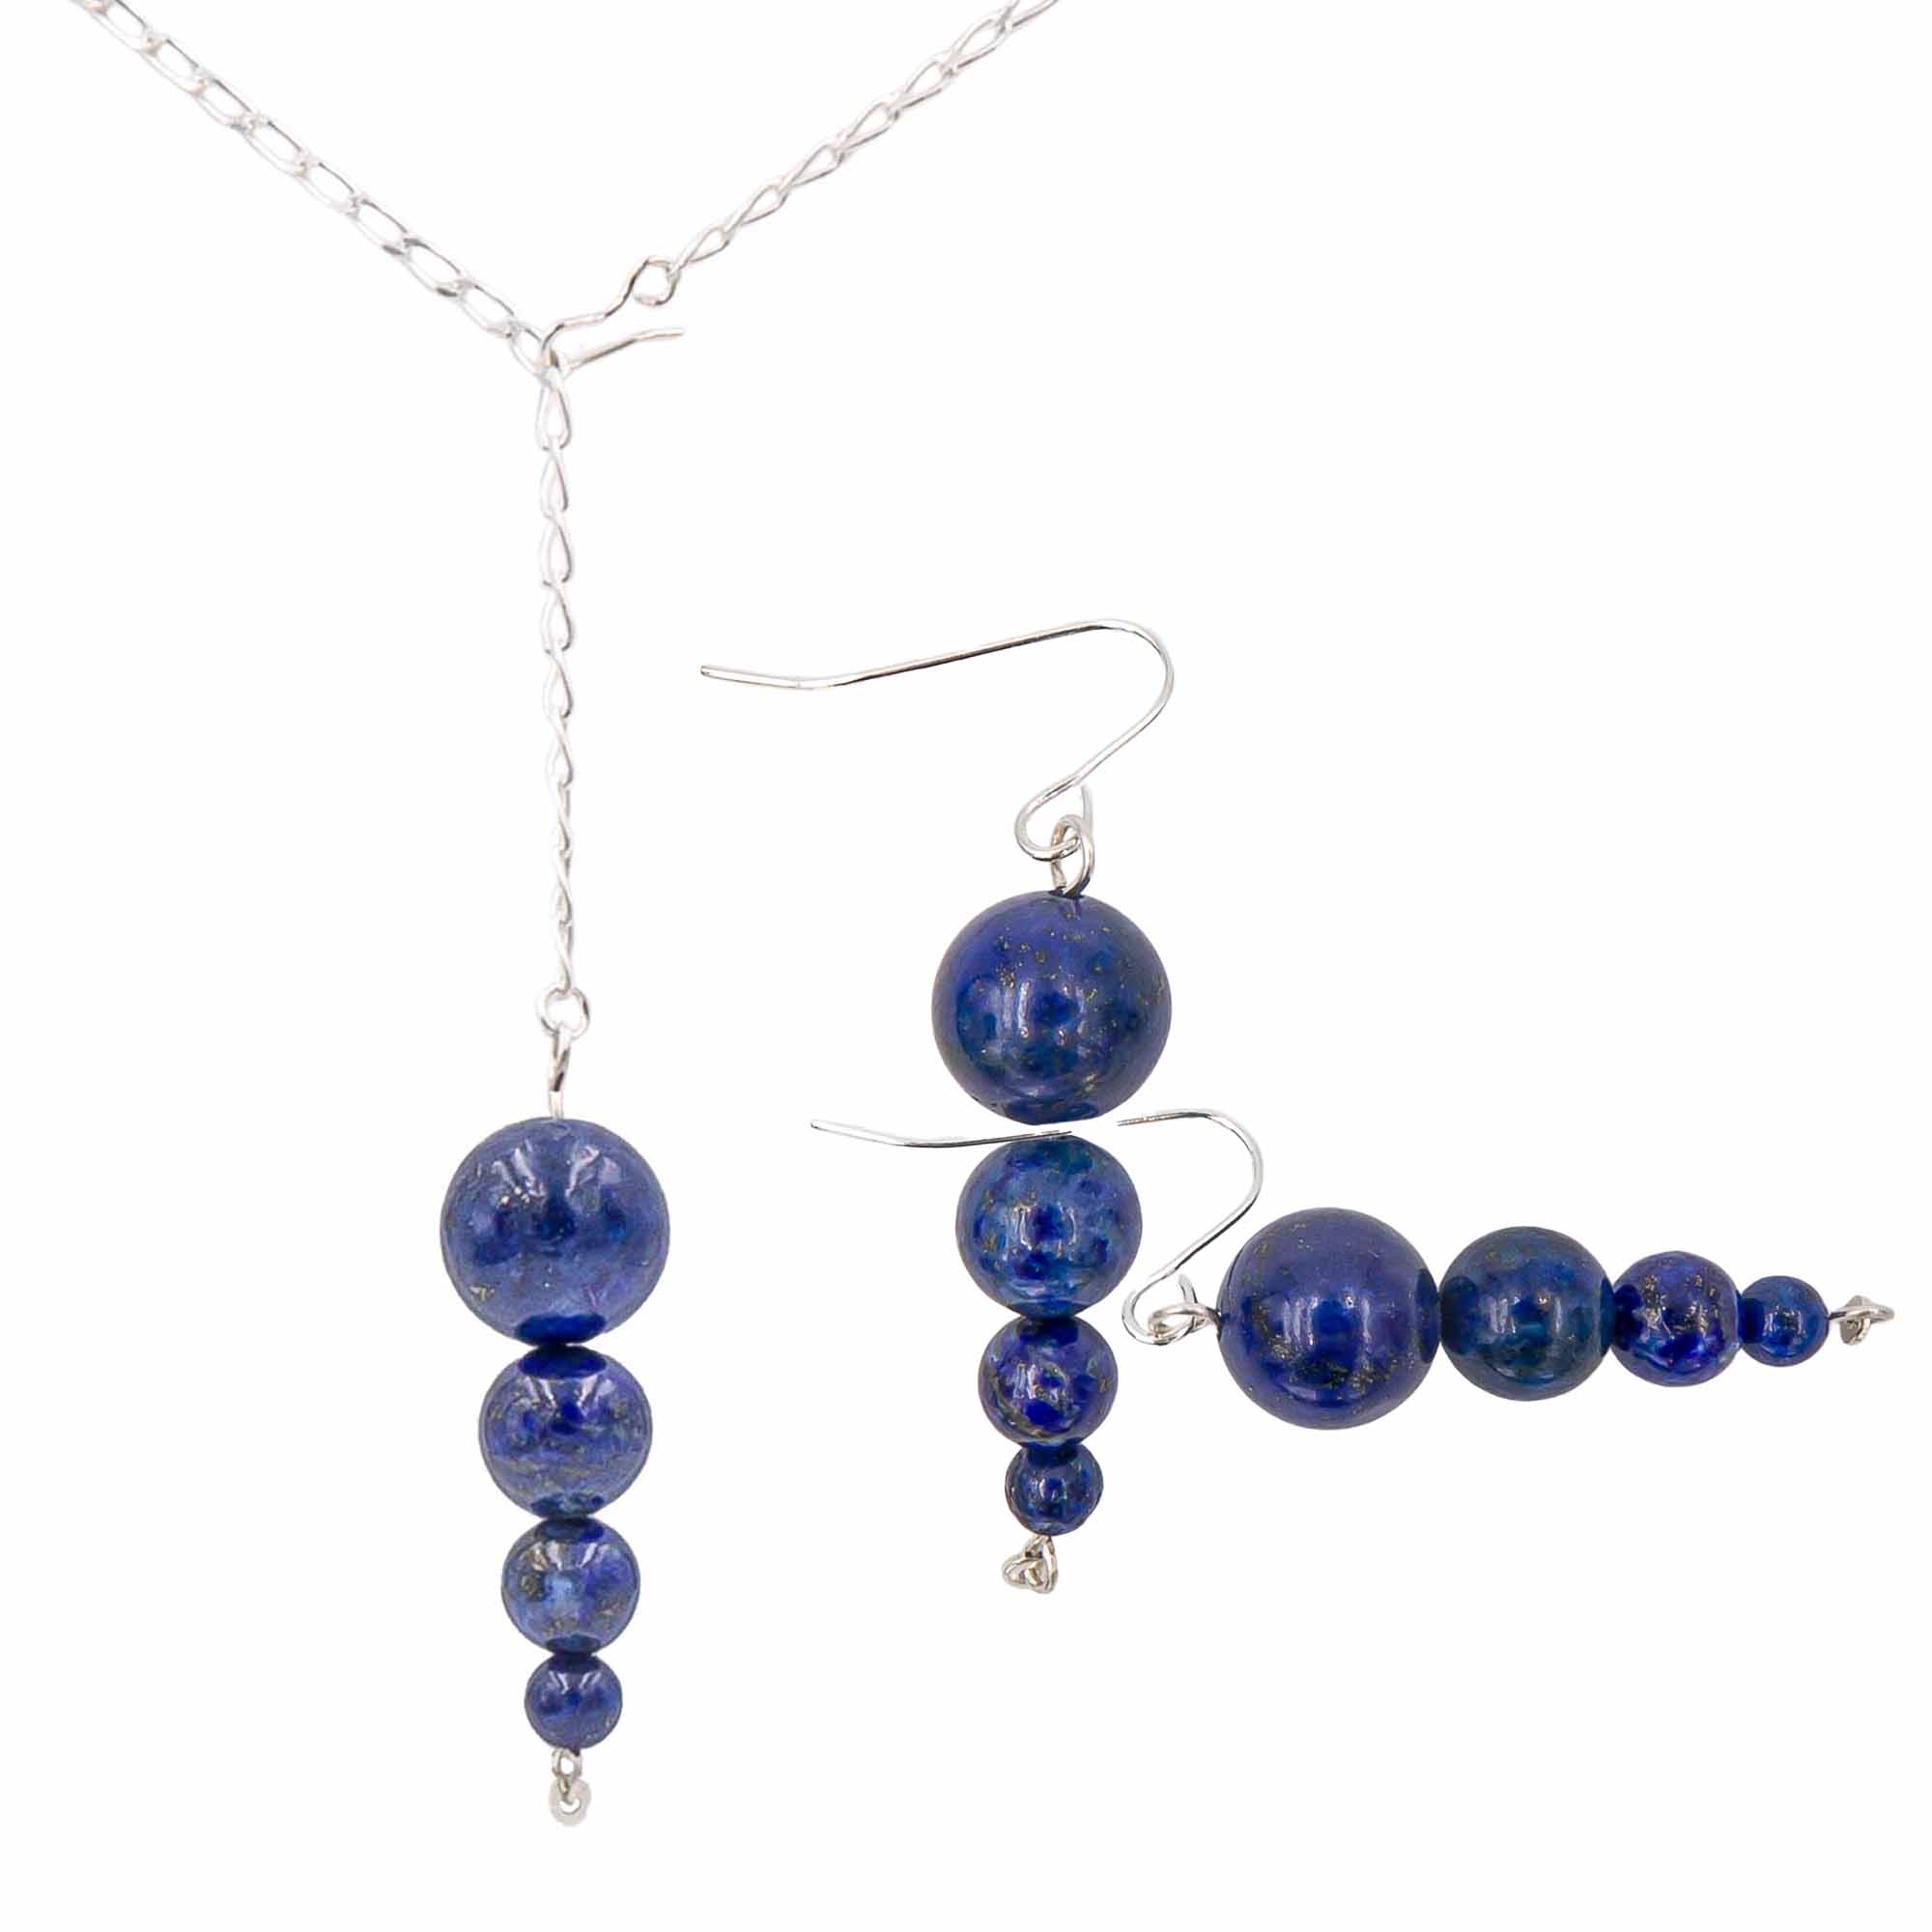 Earth Song Jewelry Handmade Blue Lapis Lazuli Pendant Sterling Silver Lariat Necklace & Earrings Set- Eco-Friendly Jewelry handmade in Colorado, USA